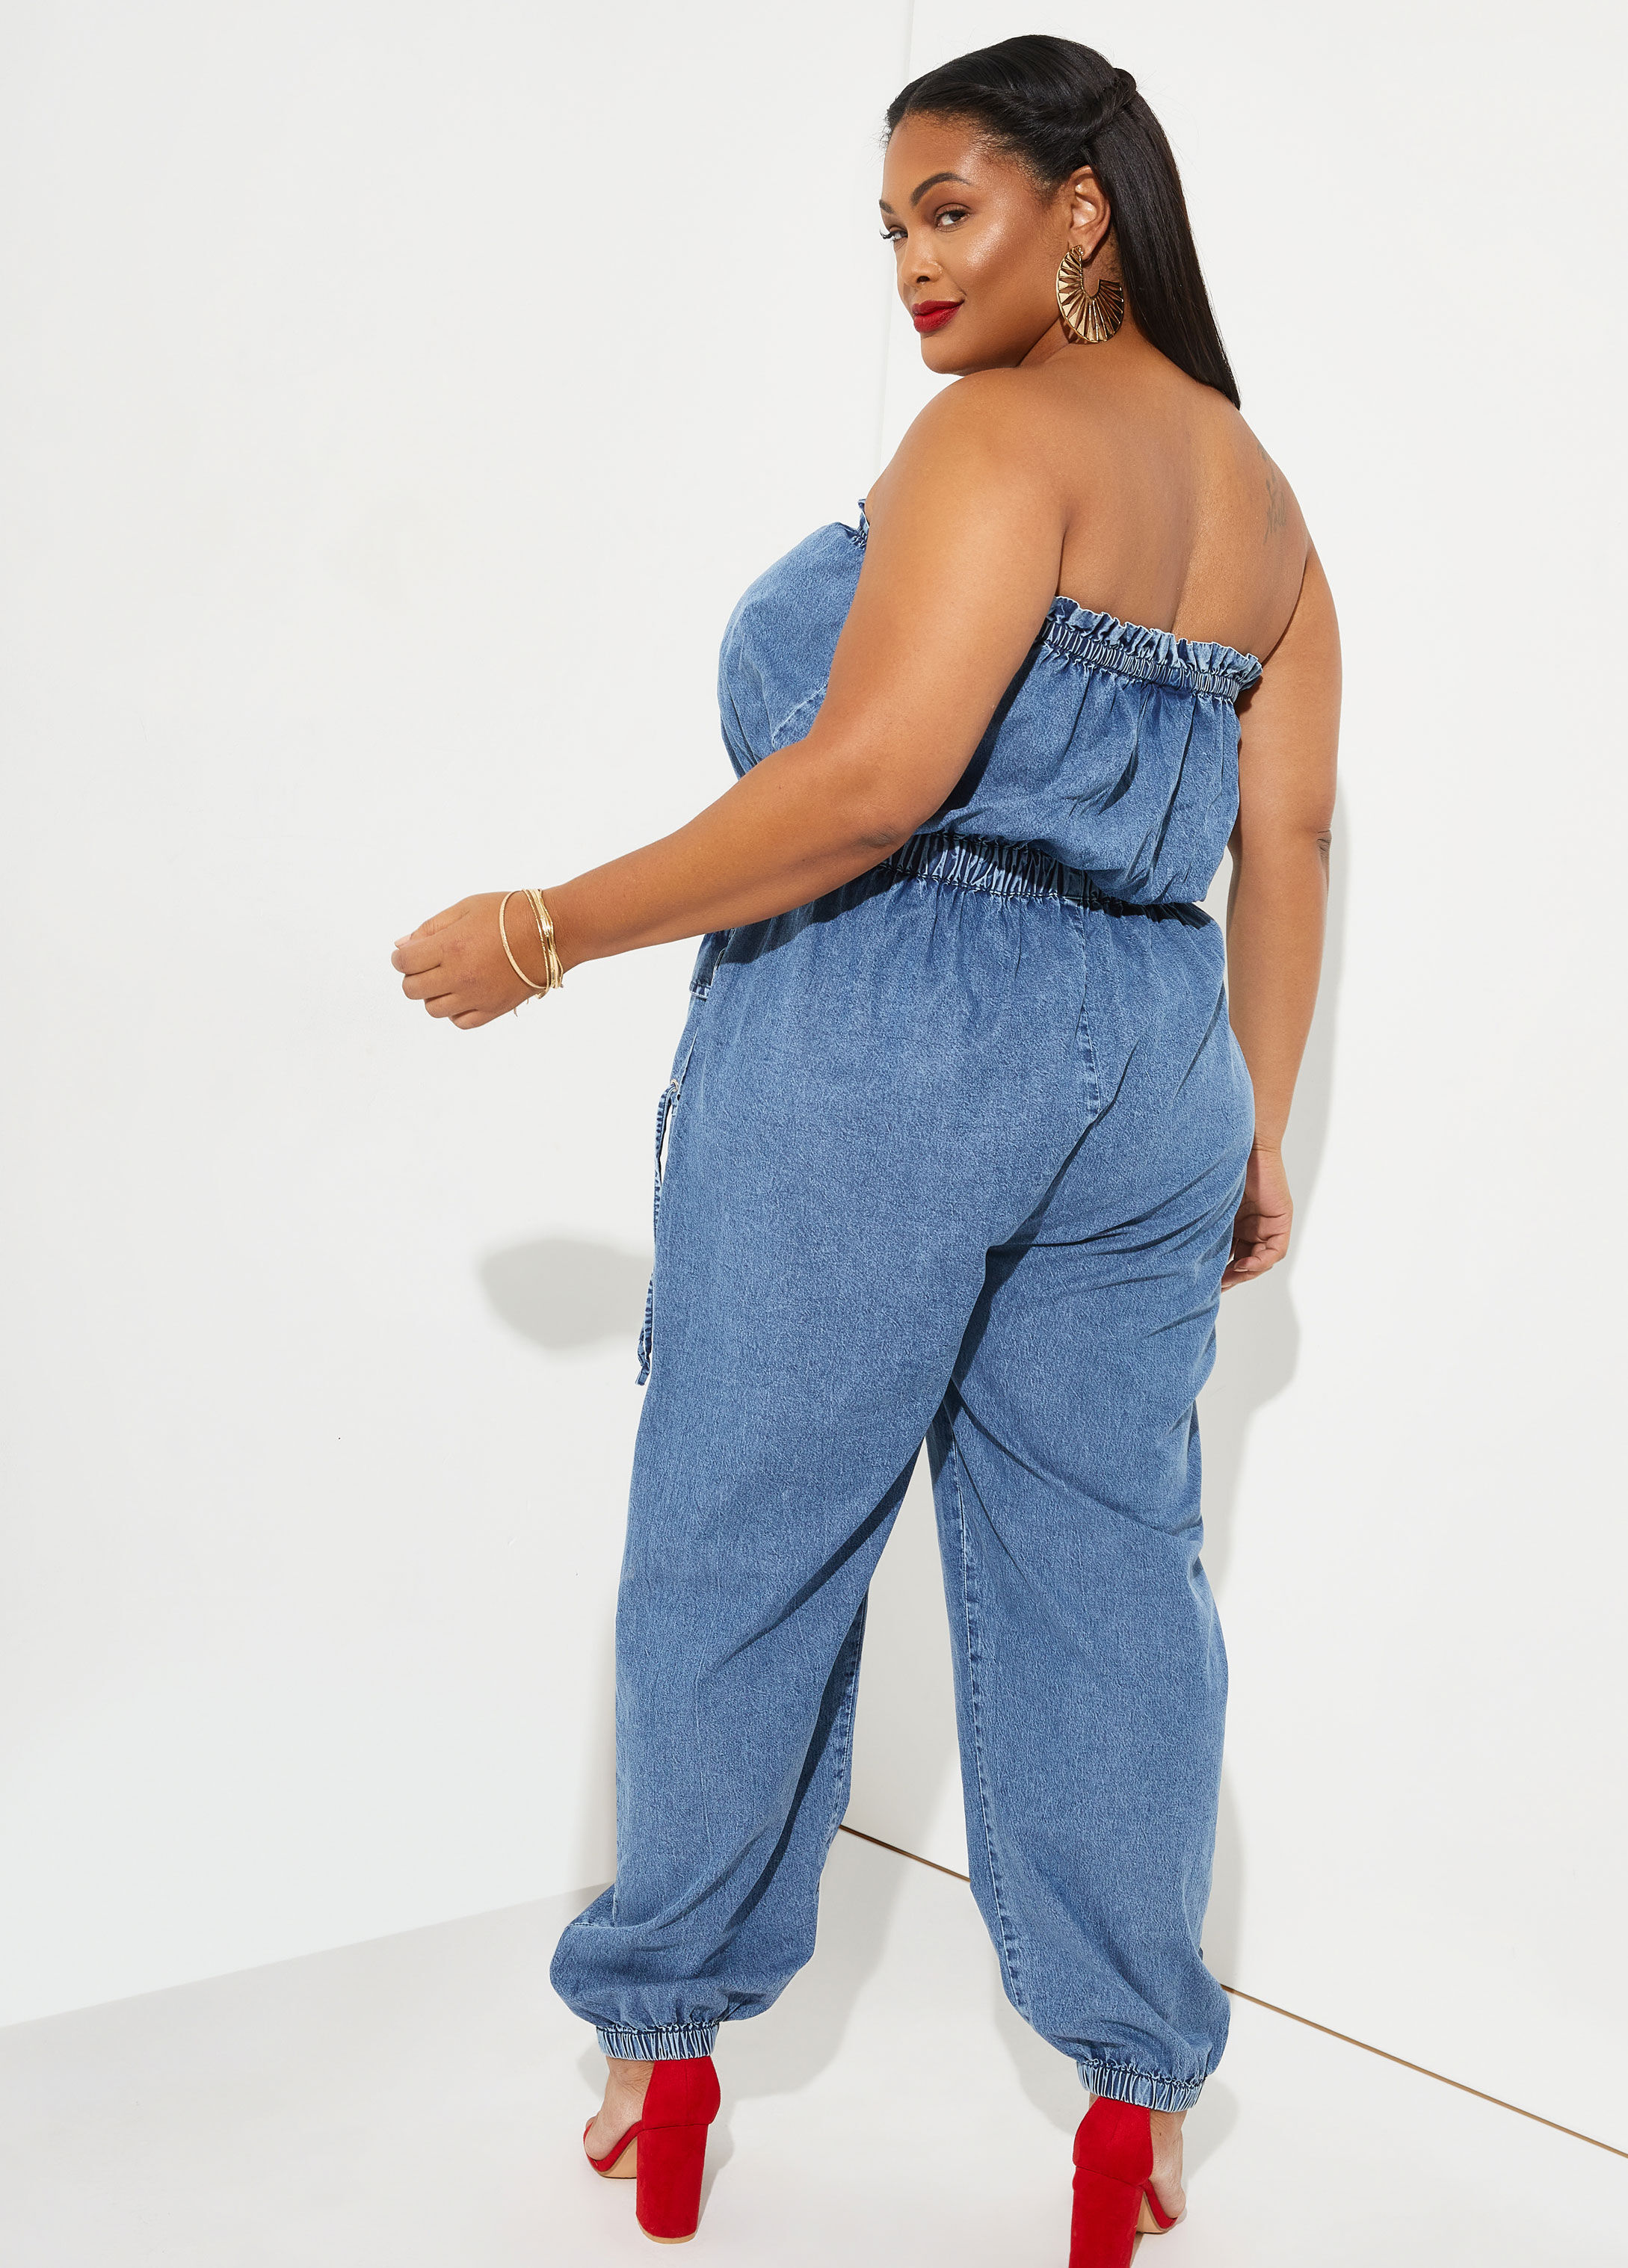 Shop Striped Denim Jumpsuit for Women from latest collection at Forever 21   568337